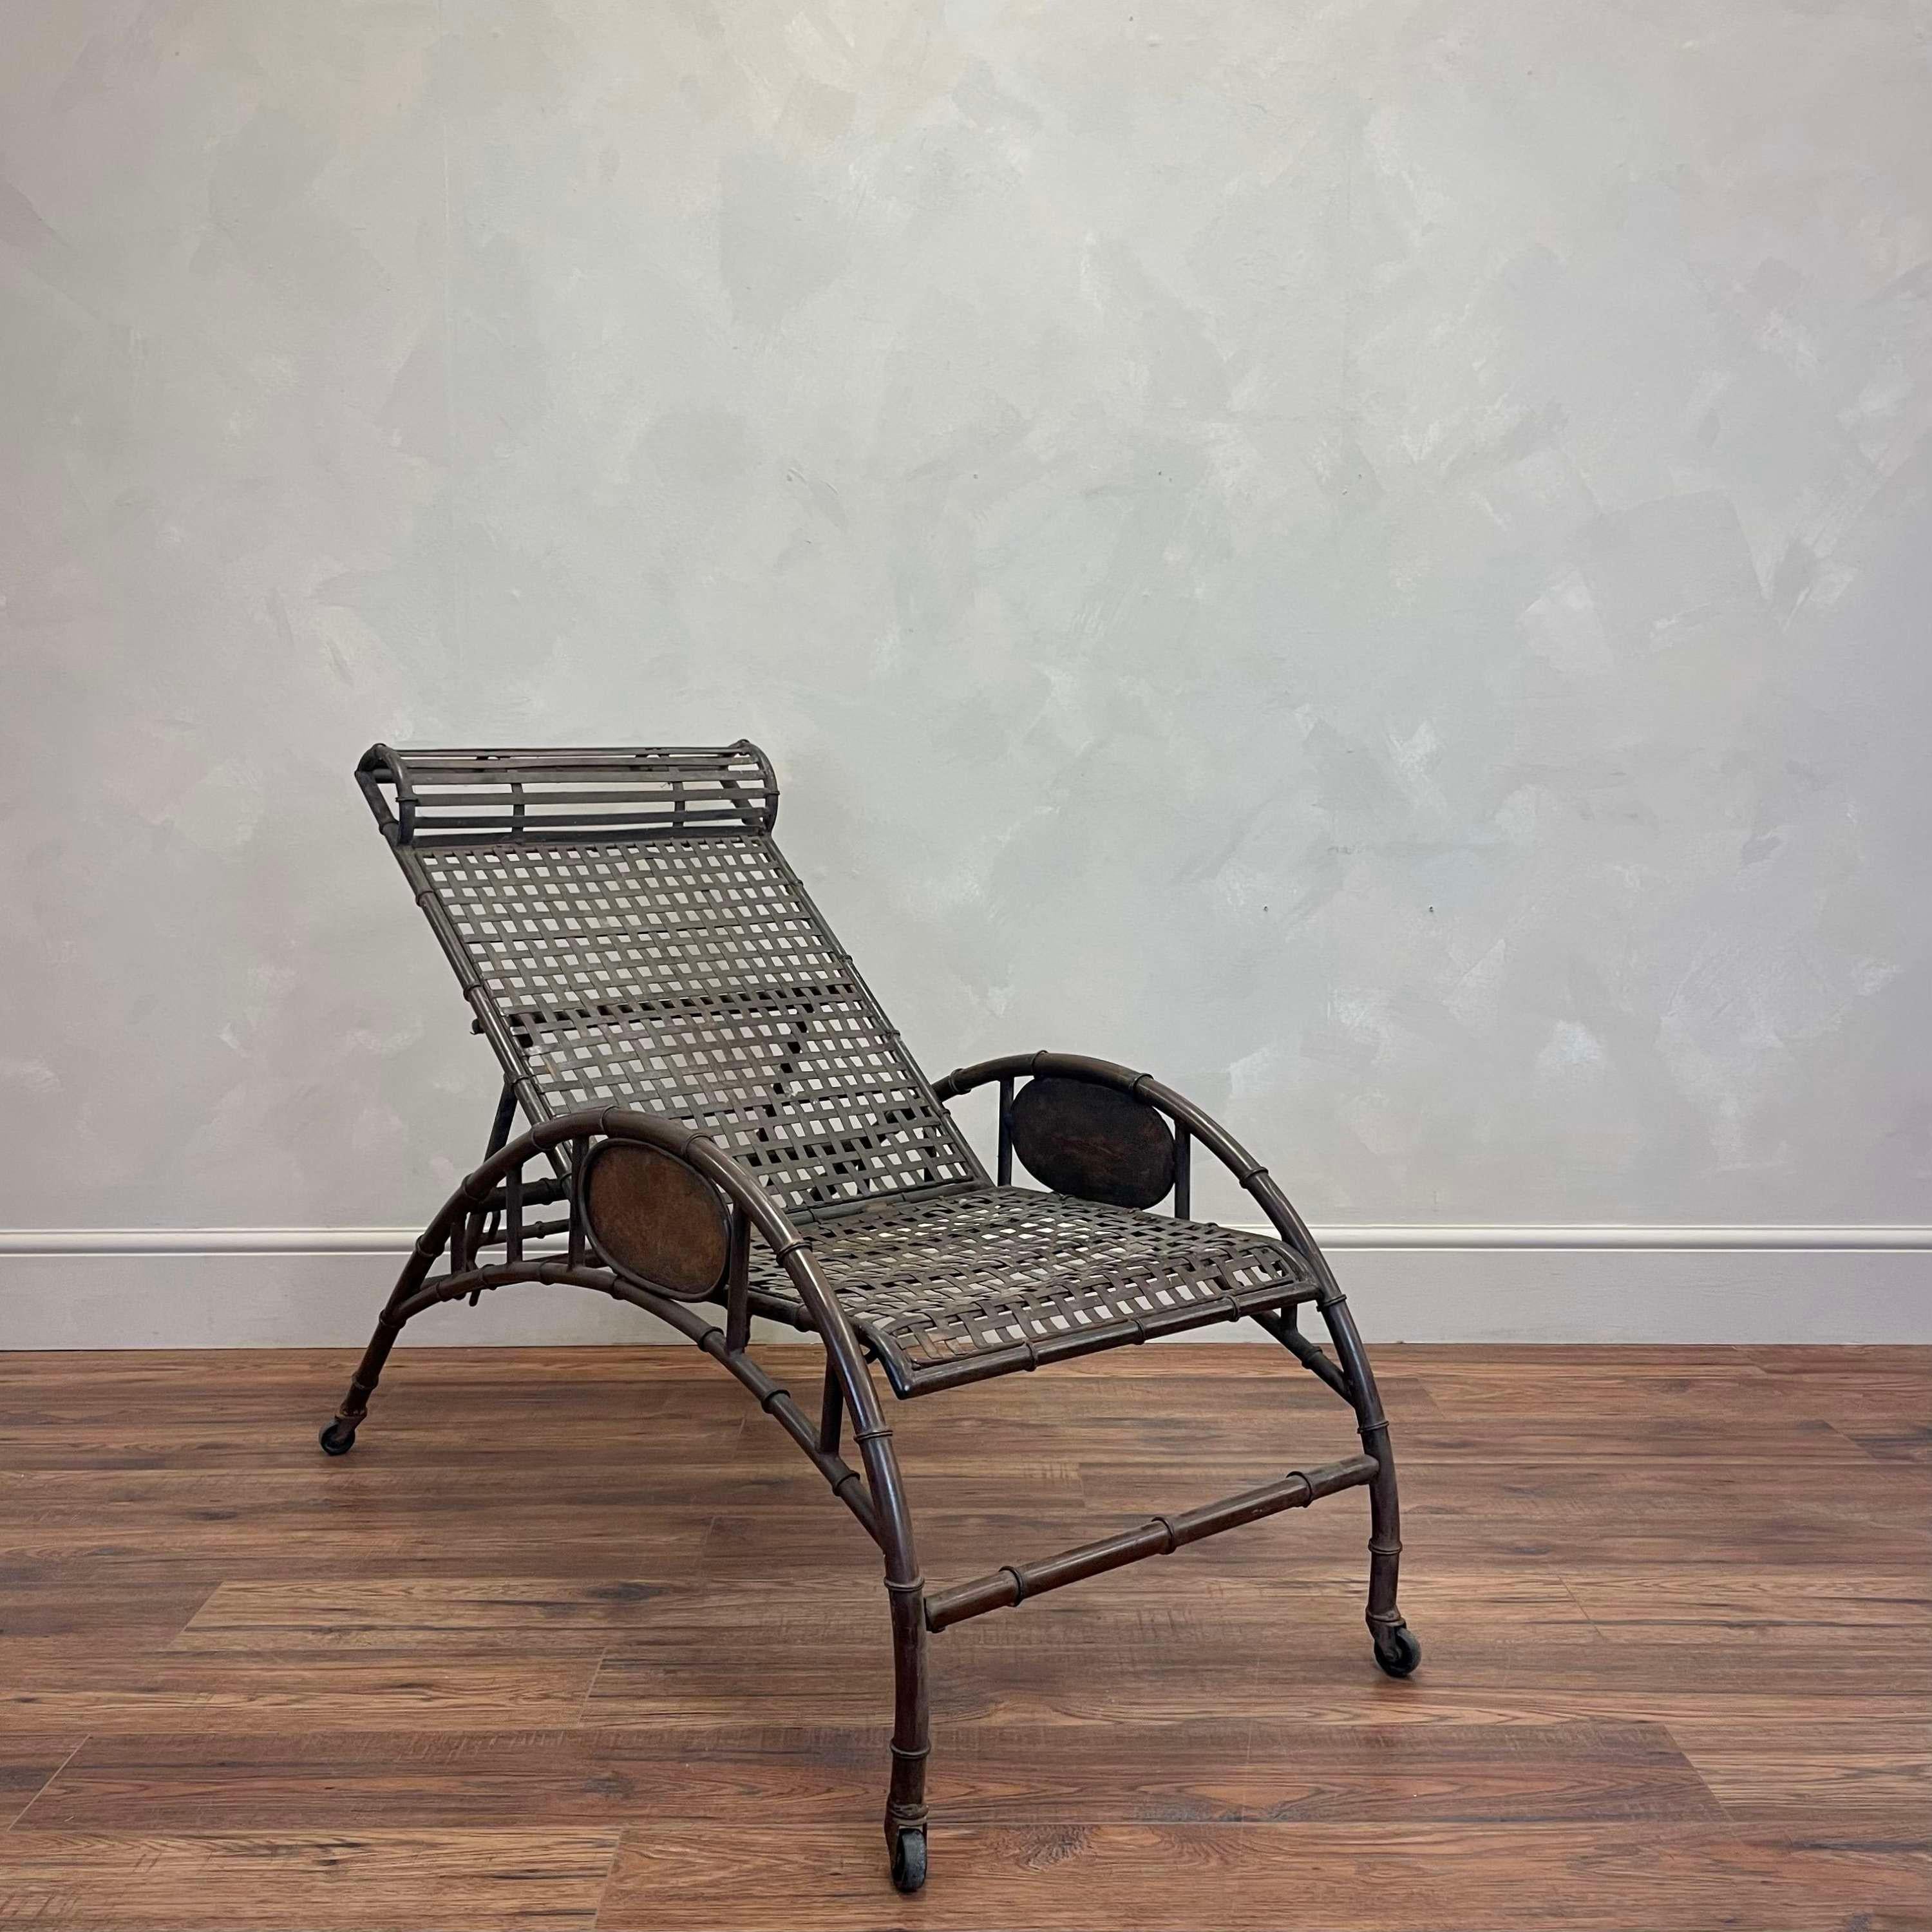 1930s French faux bamboo style iron garden recliner 

Lattic style seat and back detail

We have never seen one like it before, this came from a private home in Marseille in the South of France 
Can be used indoors as a point of difference in